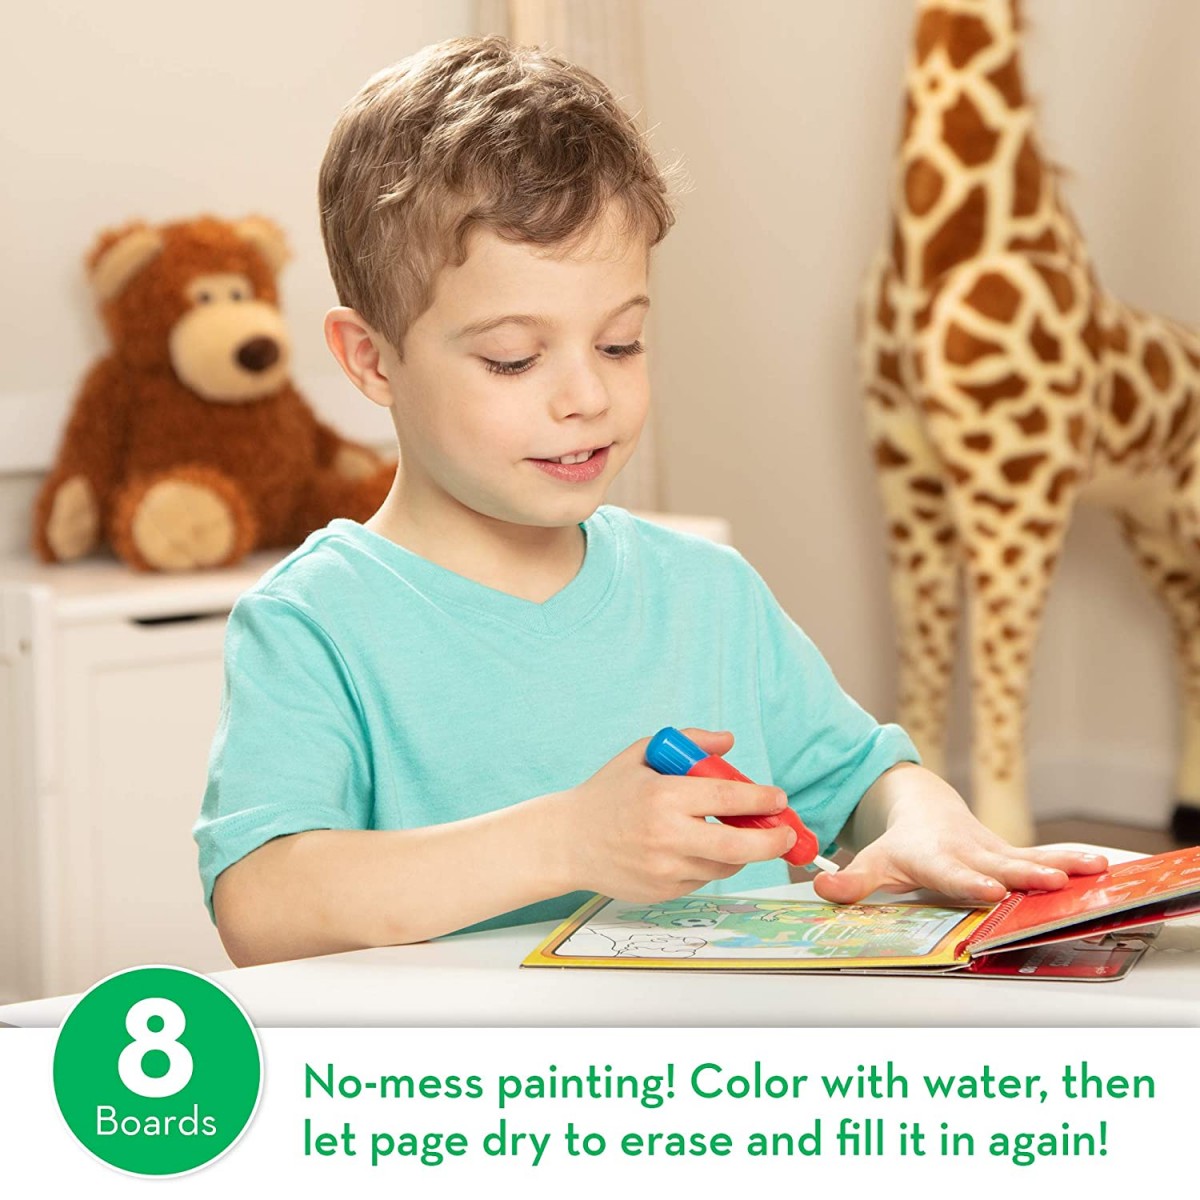 Melissa And Doug on The Go Water Wow! Sports Activity Pad (Reusable Reveal Coloring Book, Refillable Pen) DIY Art & Craft Kits for Kids age 3Y+ 